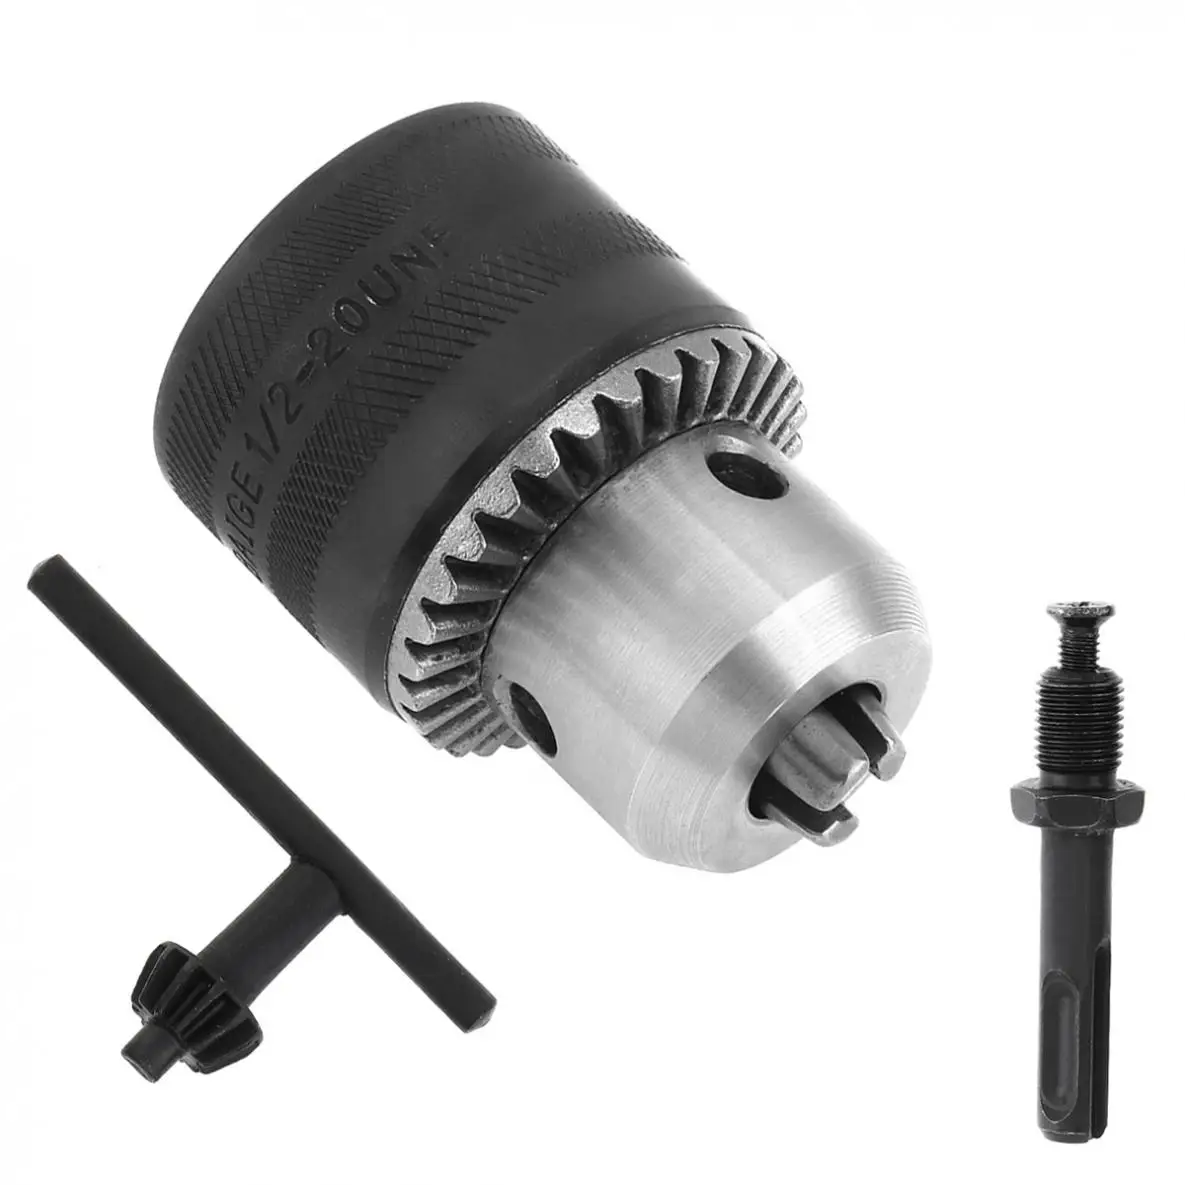 

TORO 1.5-10/13mm 1/2-20UNF Drill Chuck For Hammer Conversion with Drill Chuck Key and Round Handle of Electric Hammer Transfer